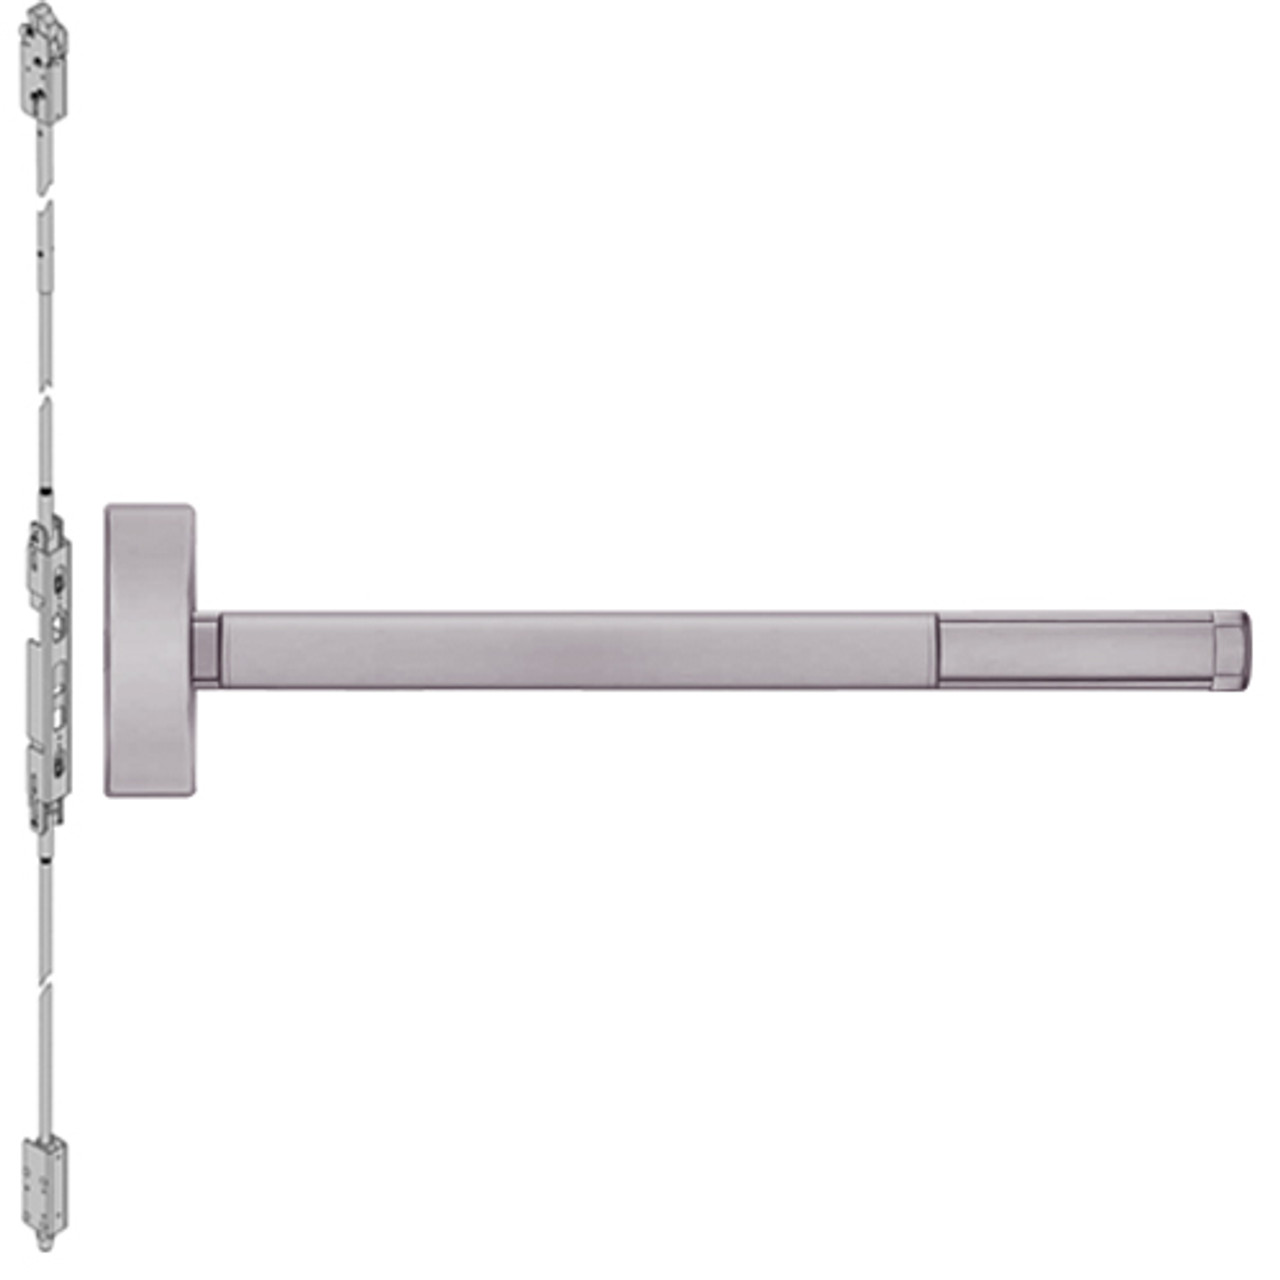 MLRFL2801-630-36 PHI 2800 Series Fire Rated Concealed Vertical Rod Exit Device with Motorized Latch Retraction Prepped for Cover Plate in Satin Stainless Steel Finish